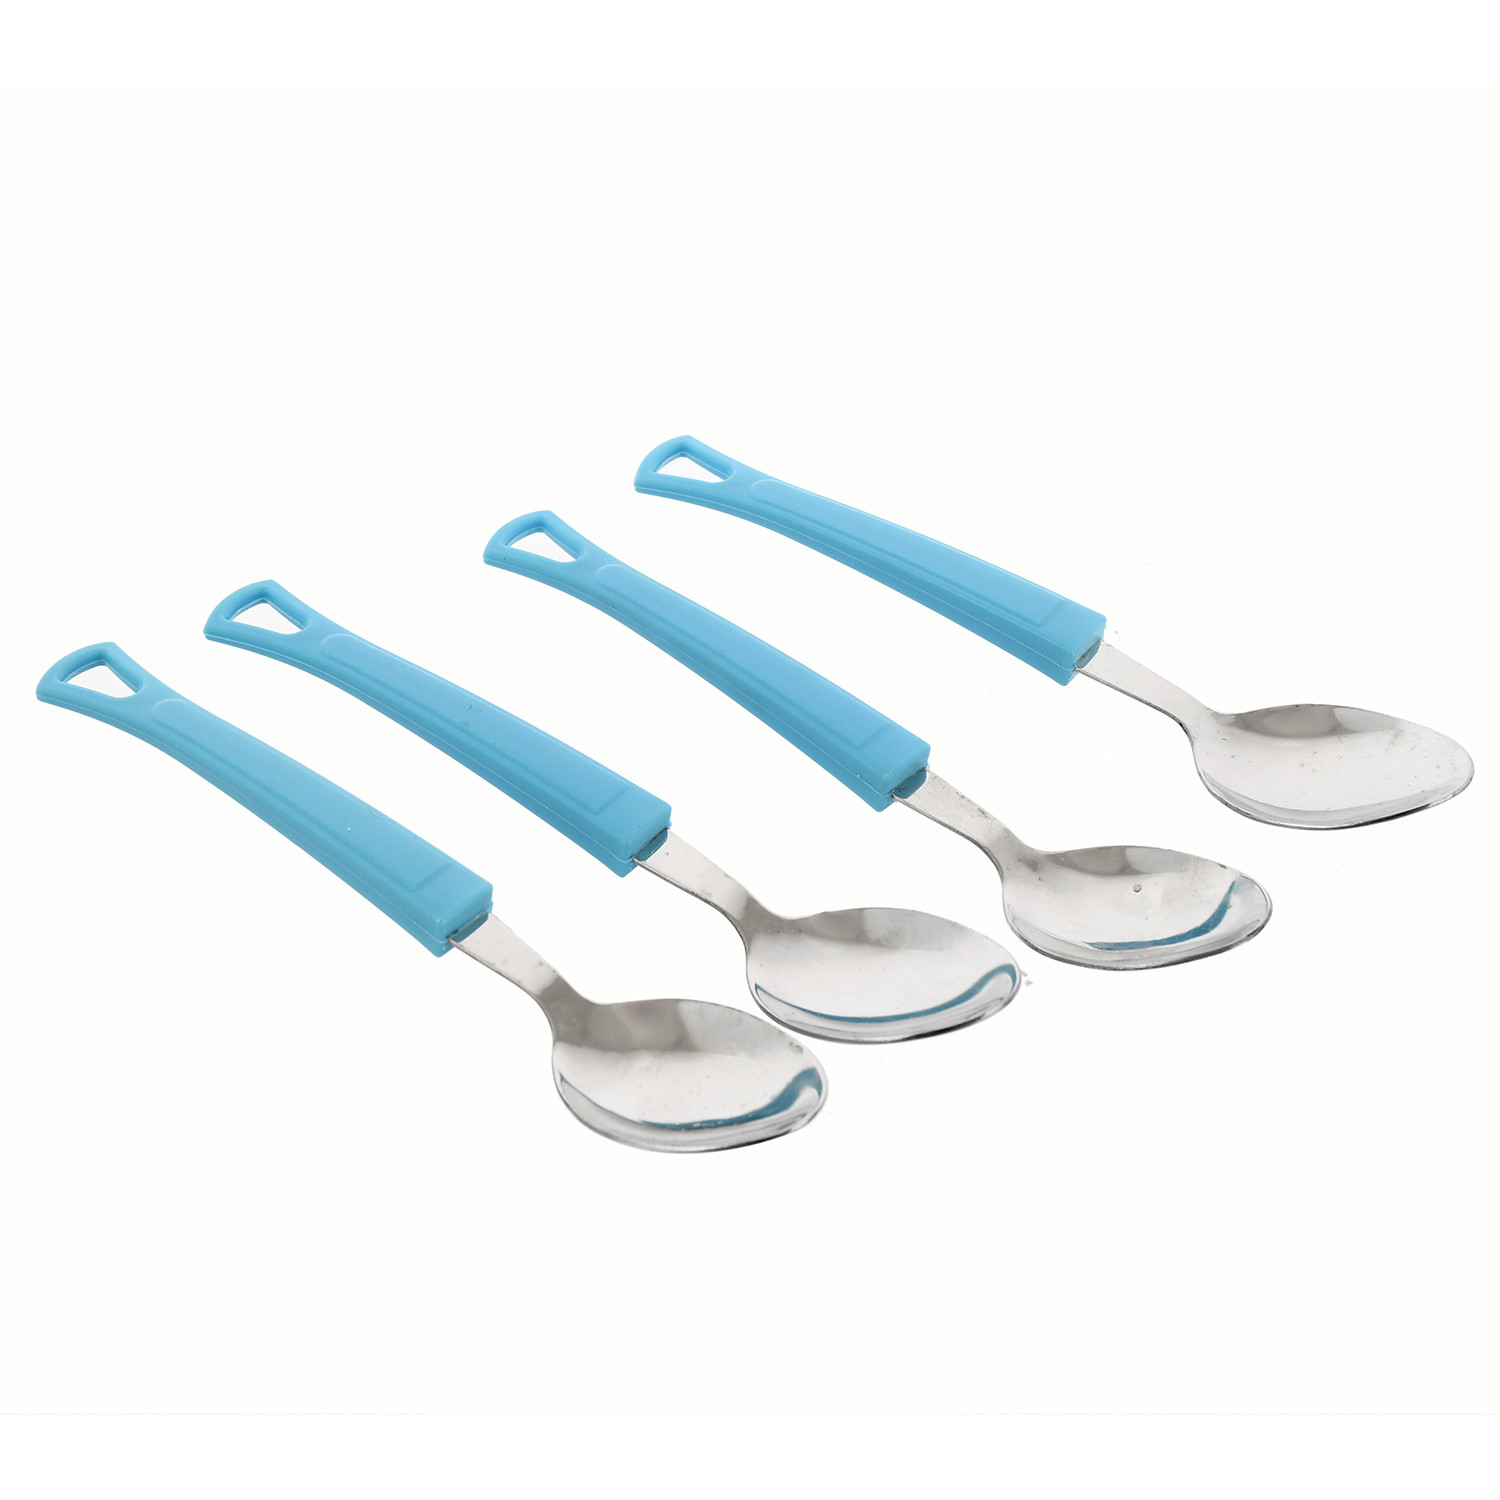 Kuber Industries Swastic Cutlery Set 24 pcs with Stand Made from Stainless Steel and ABS Plastic (Blue) -CTKTC39442